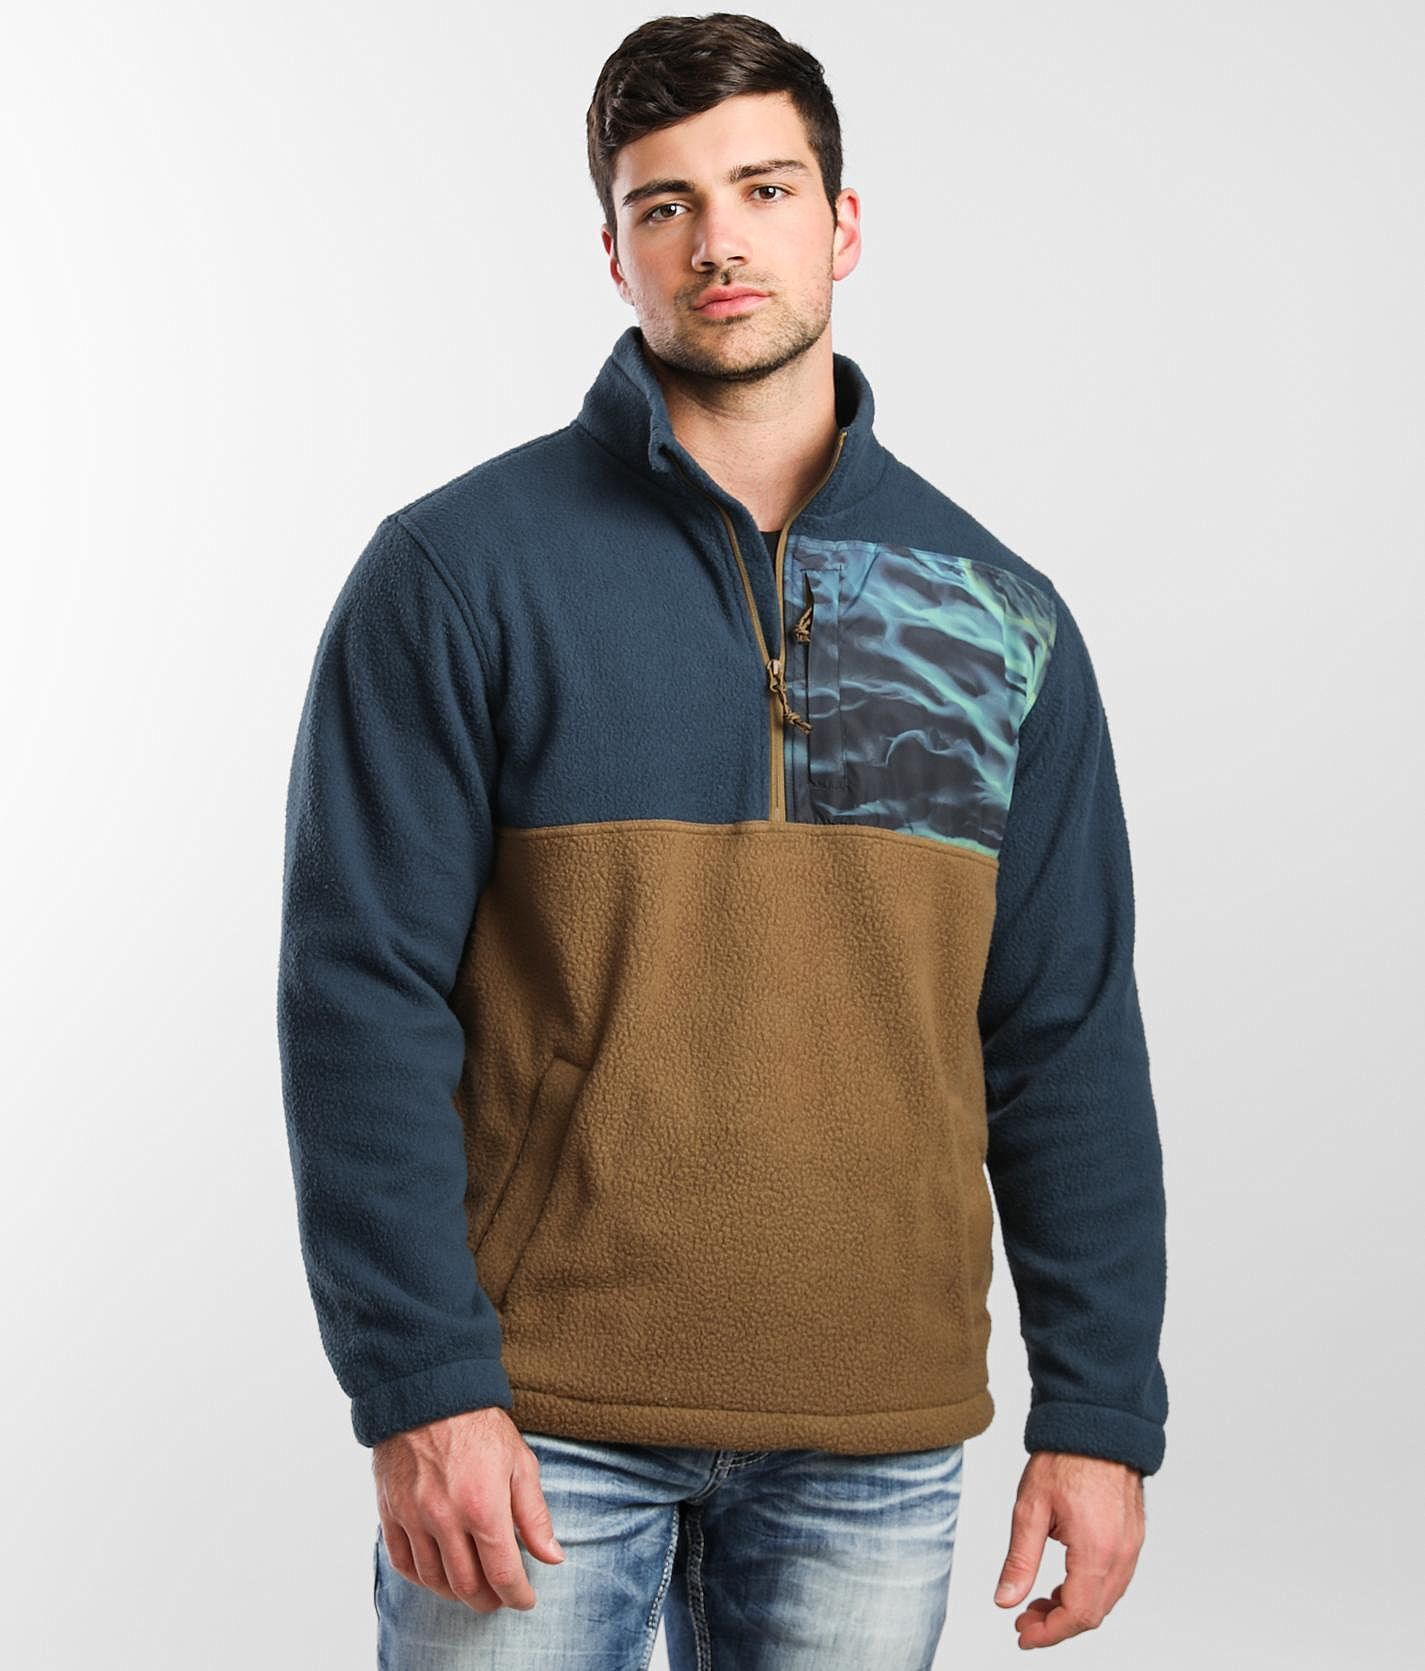 Billabong Boundary Fleece Pullover  - Blue;Brown - male - Size: Large